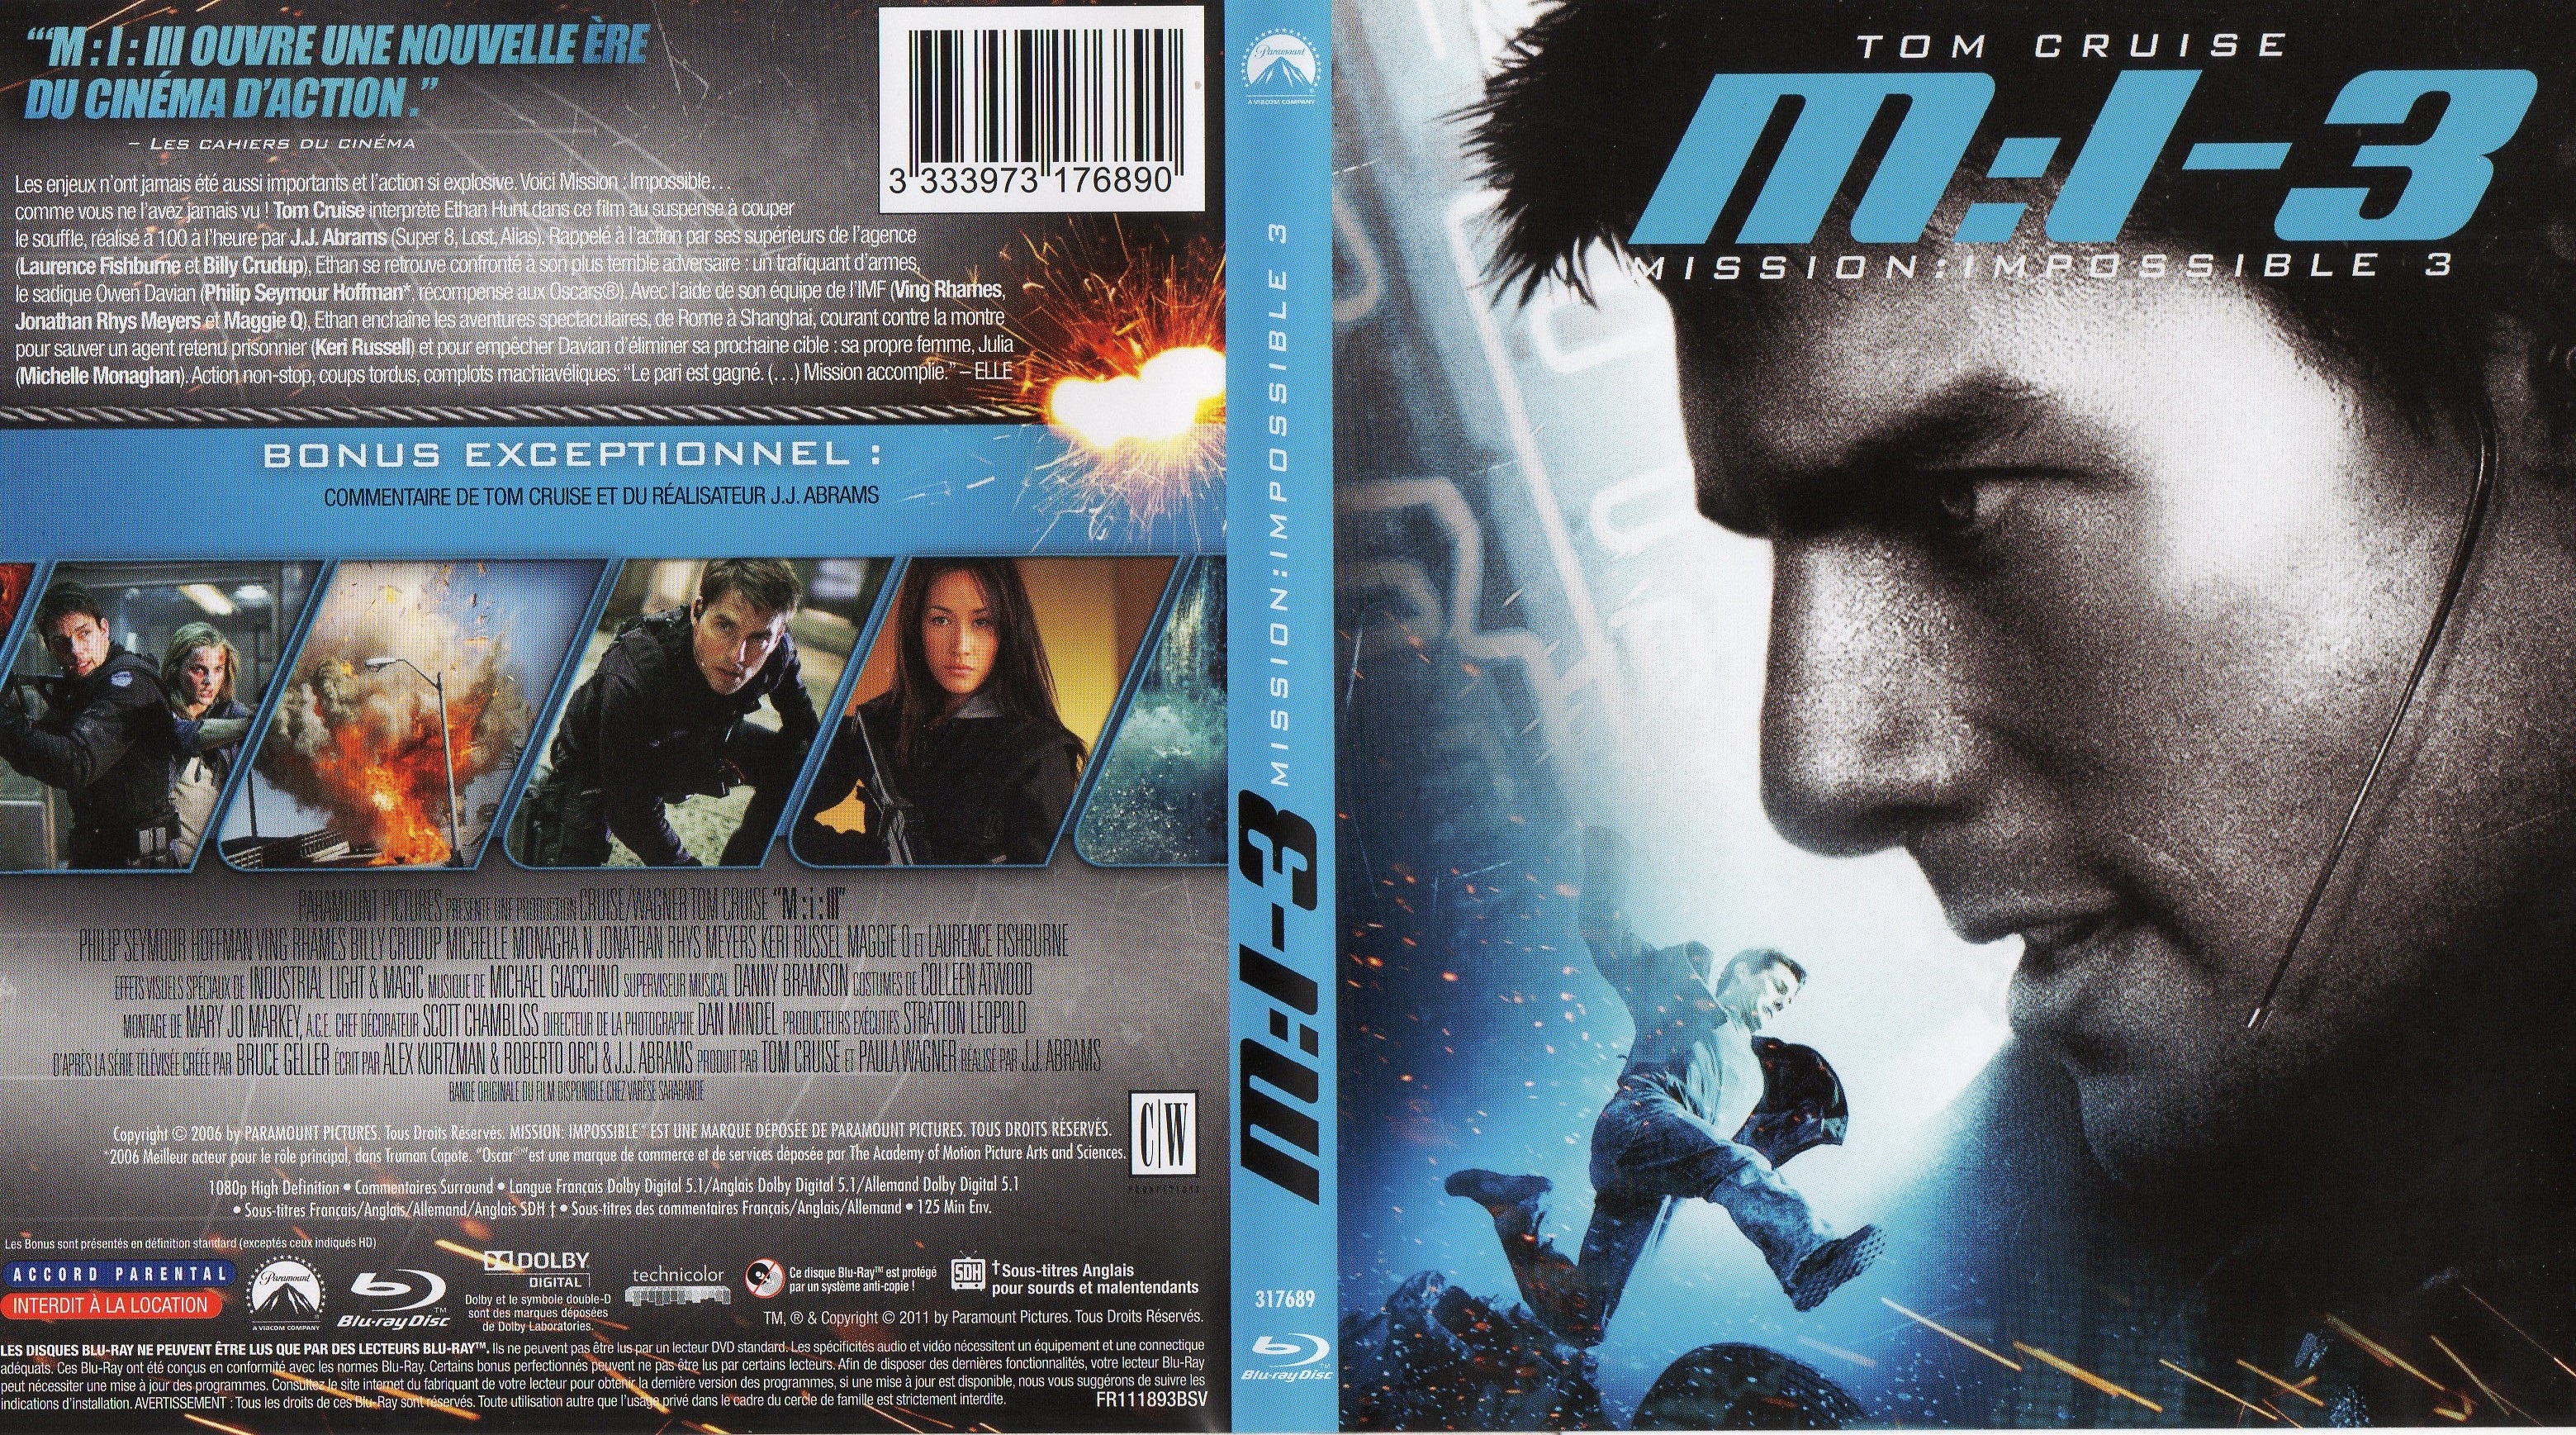 Jaquette DVD Mission impossible 3 (BLU-RAY) v2